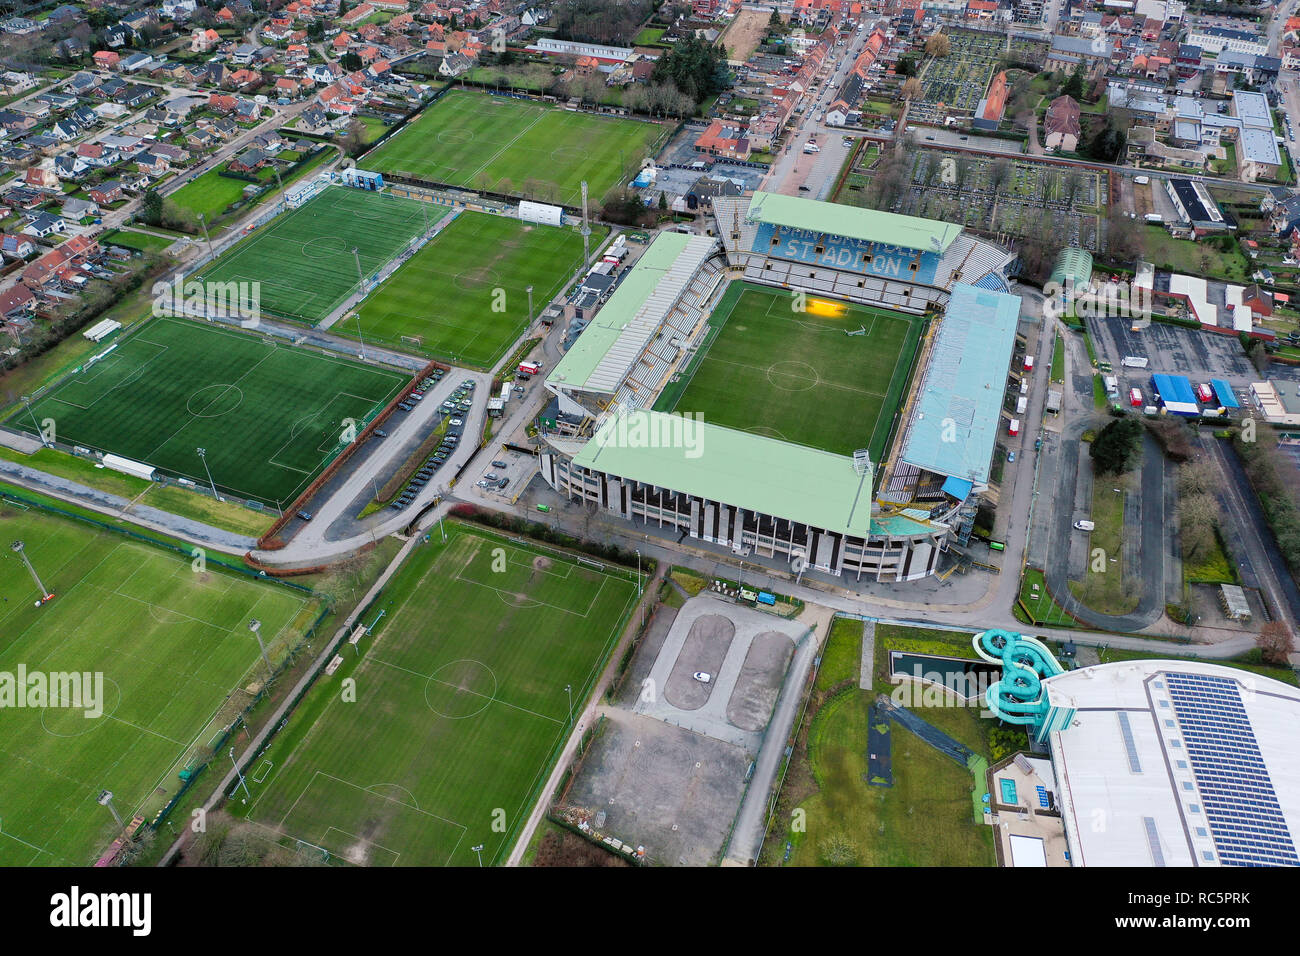 JANUARY 5, 2019, Bruges, Belgium: Jan Breydel Stadium aerial view is home for Club Brugge and Cercle Brugge soccer clubs ft. flying urban neighborhood Stock Photo